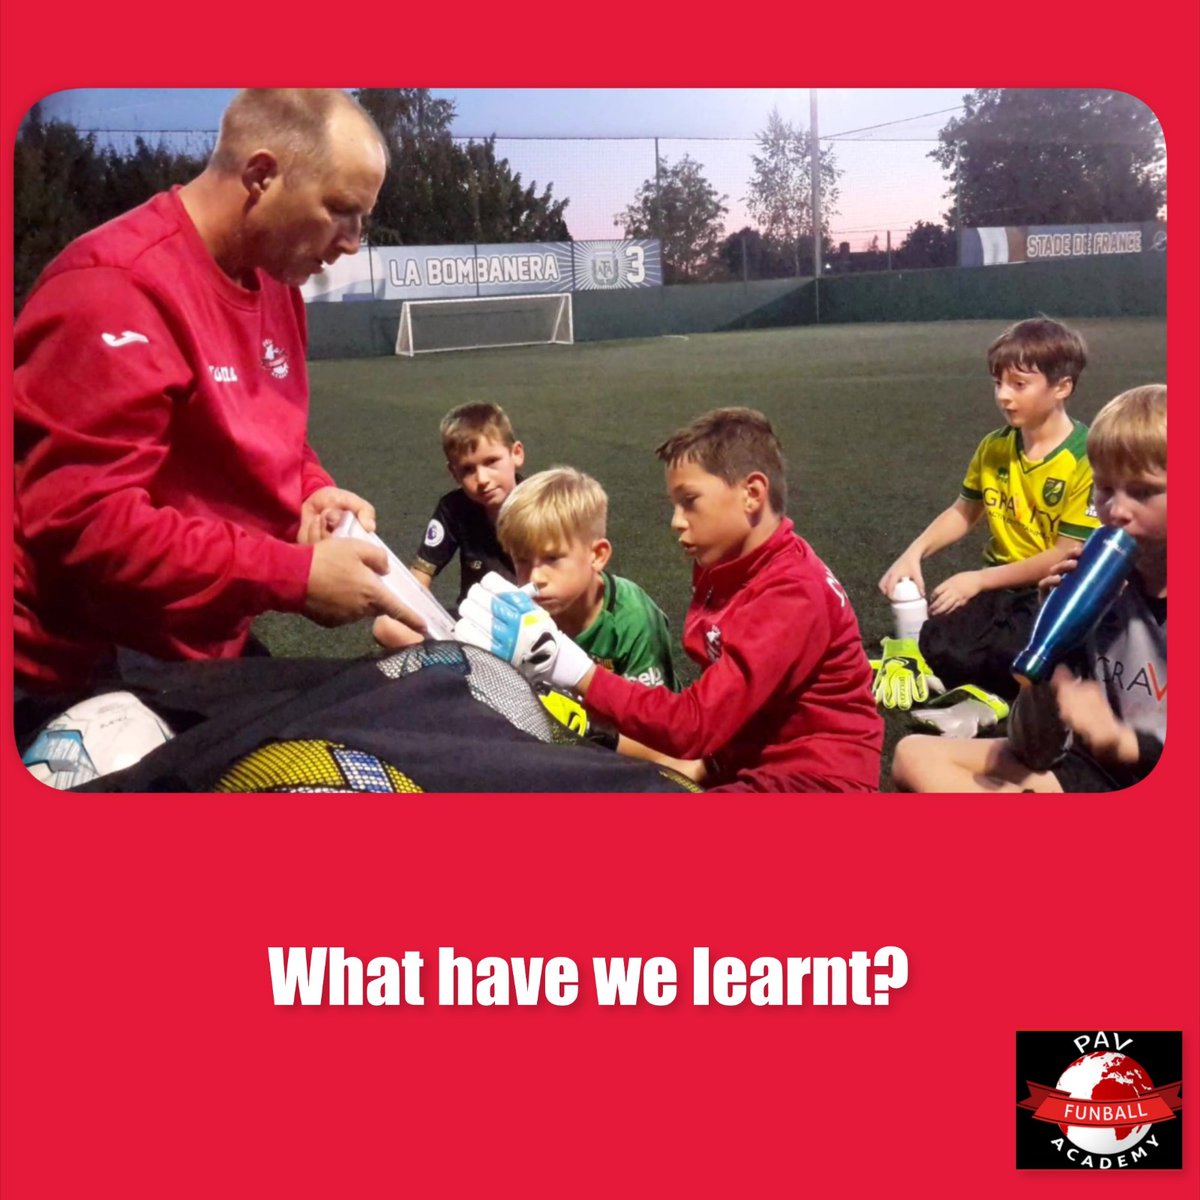 Amongst the many football coaching sessions we offer at @goalsnorwich , we also have specific Goalkeeping sessions for kids who want to improve their goalkeeping skills. These take place every Thursday from 6.30-7.30pm #LearnMore via bit.ly/2ZSfFu5